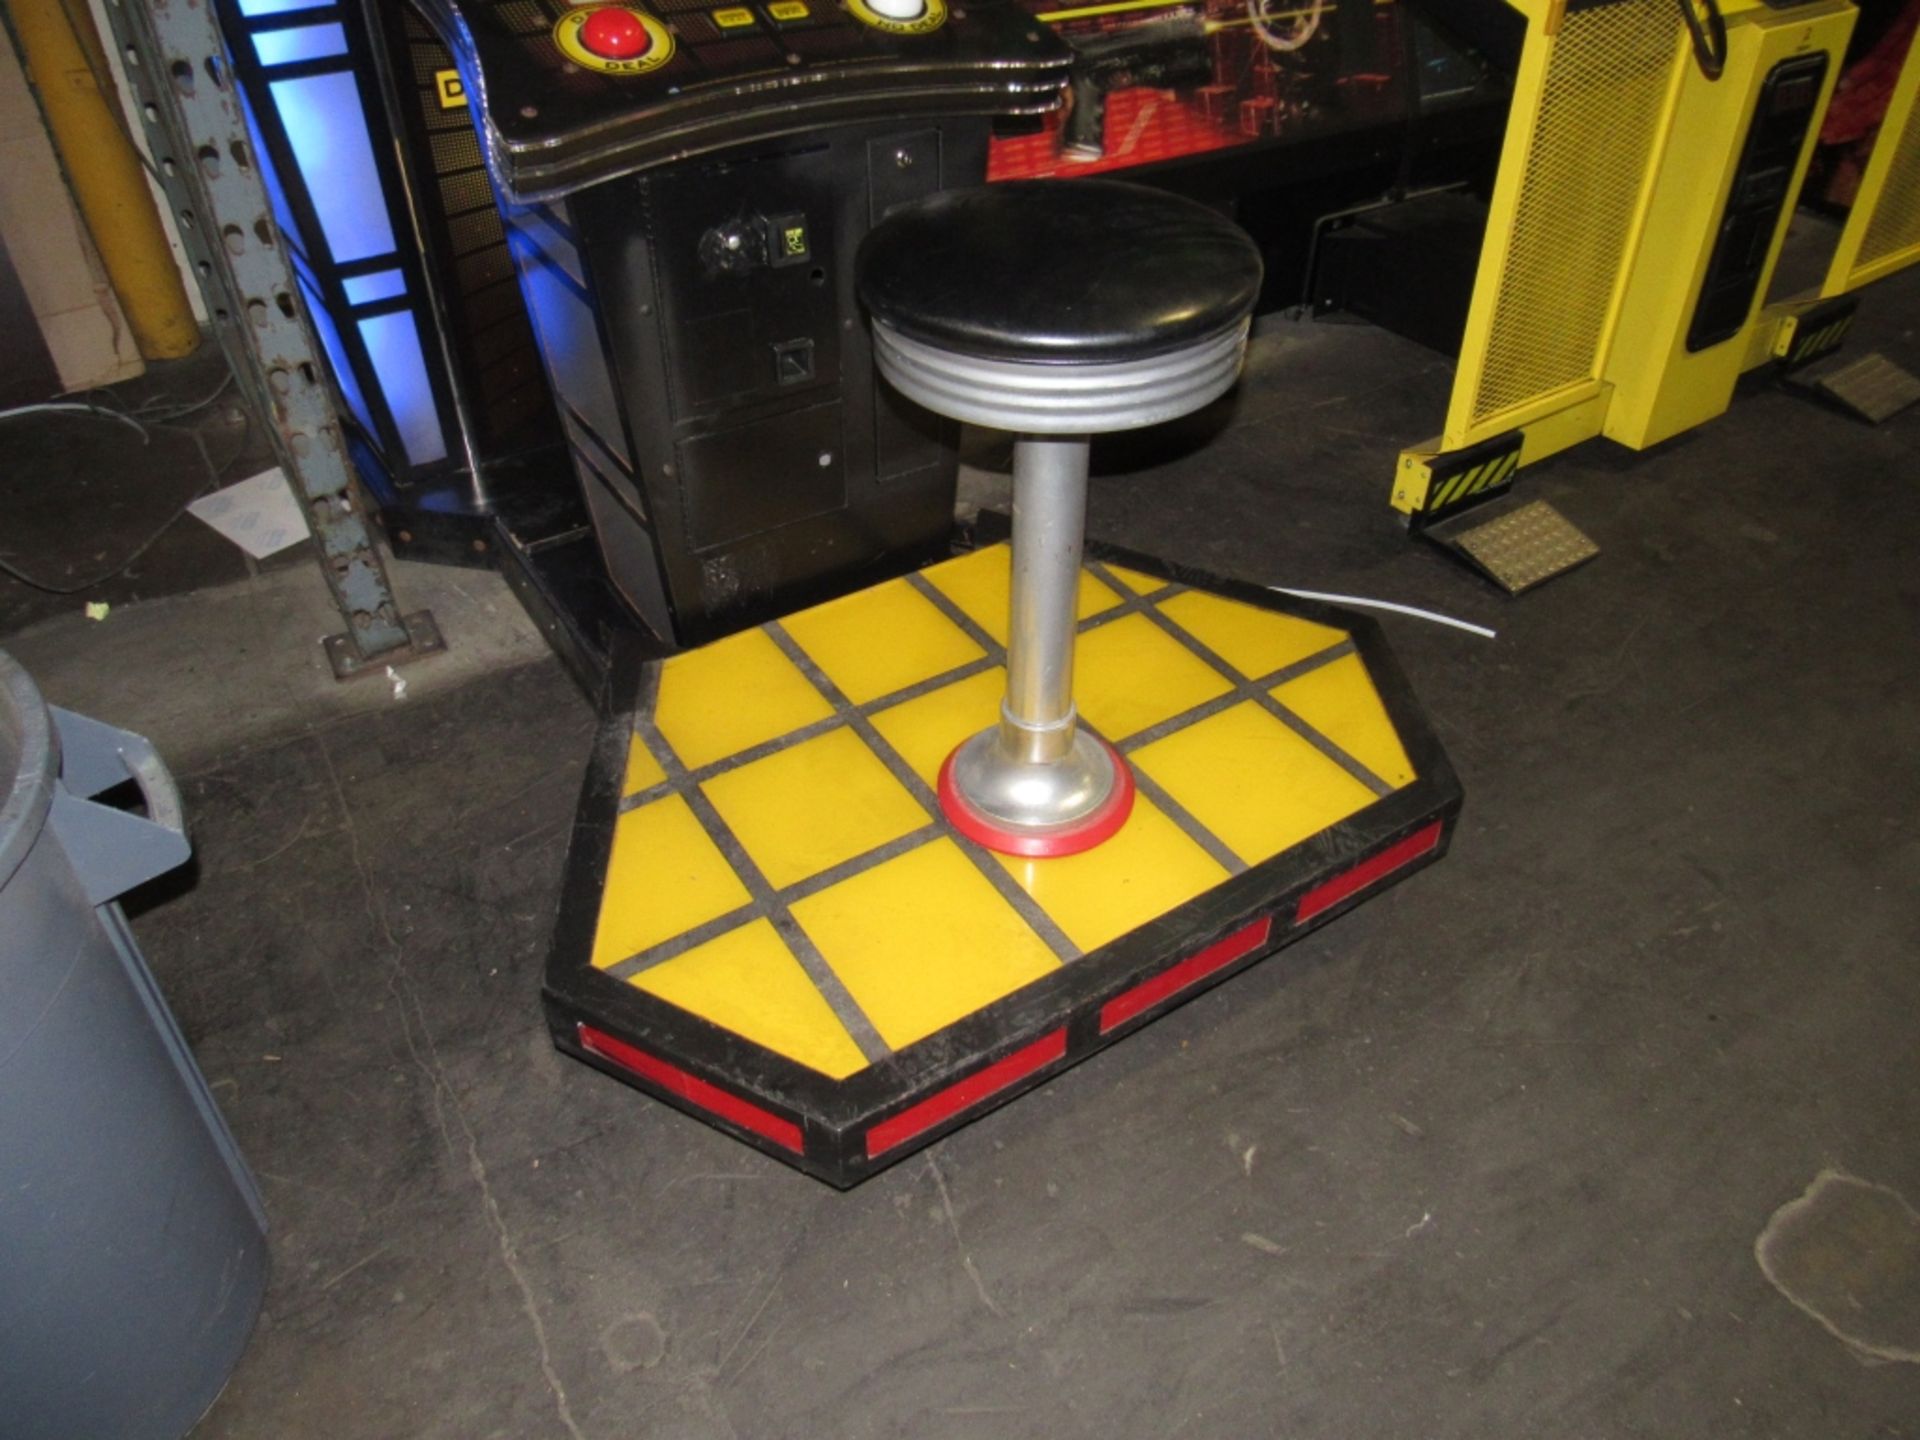 DEAL OR NO DEAL DELUXE SIZE ARCADE GAME ICE - Image 5 of 9